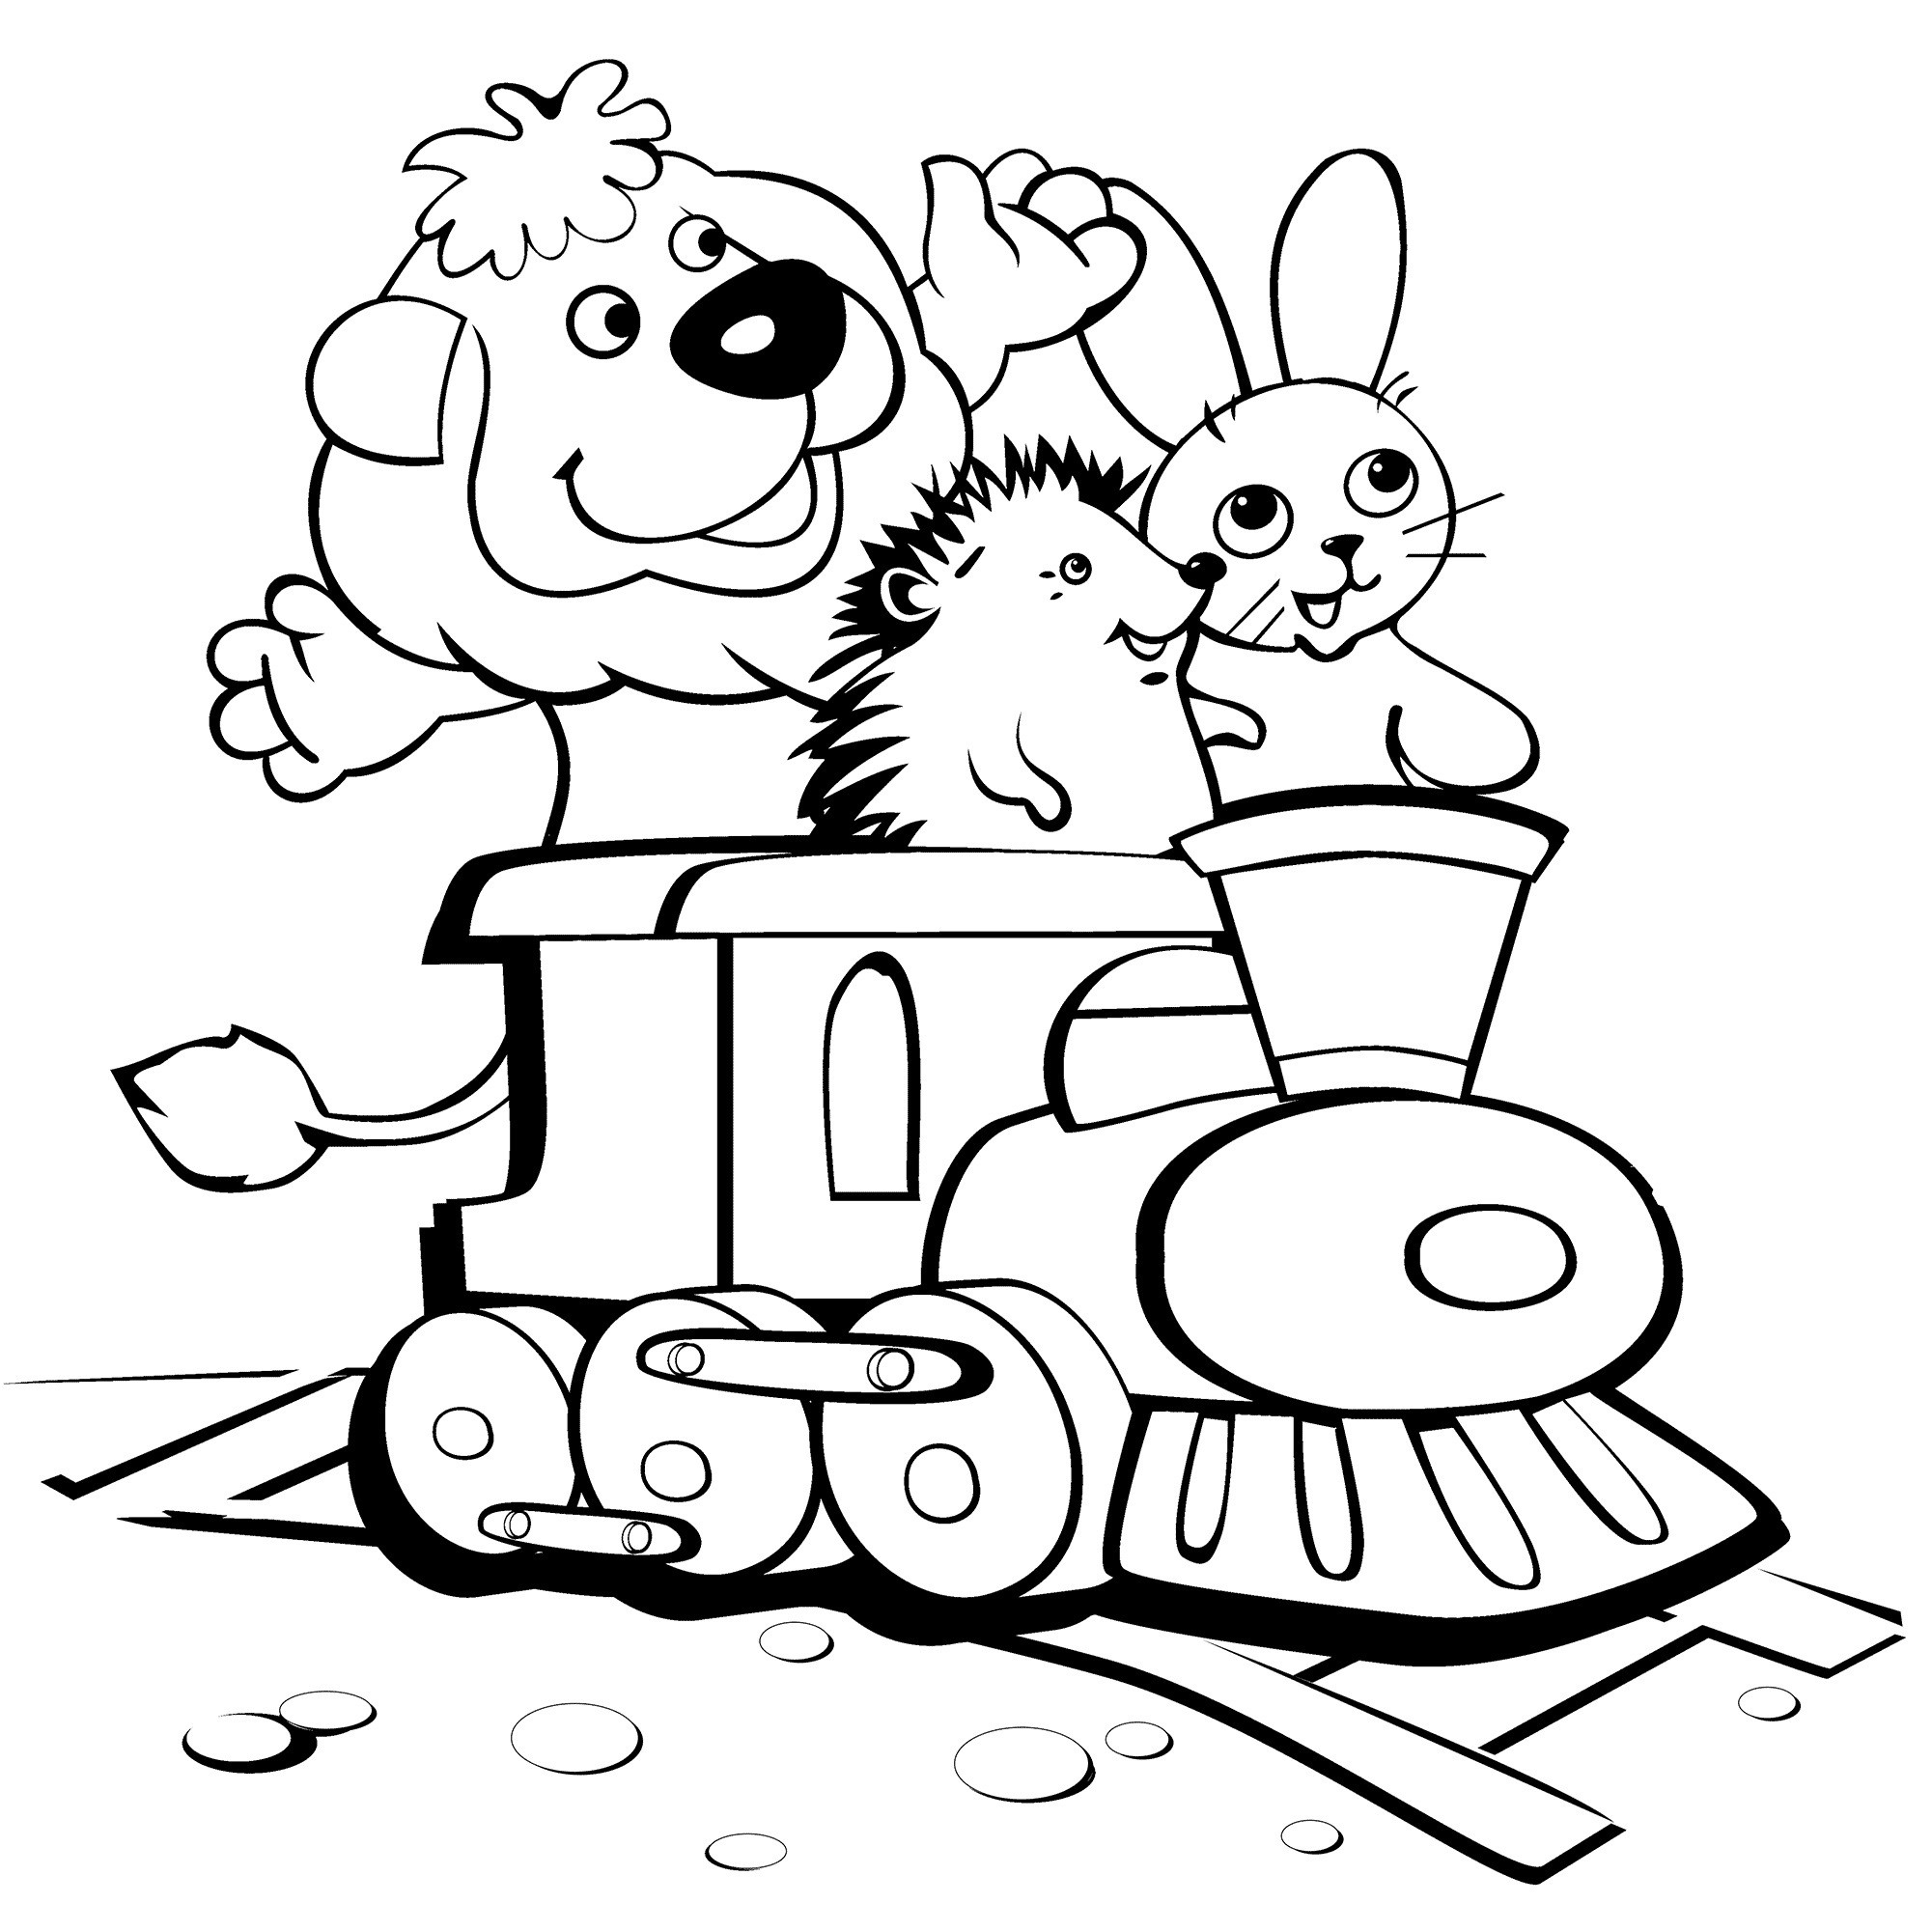 Coloring Pages For Kids Printable
 Free Printable Funny Coloring Pages For Kids